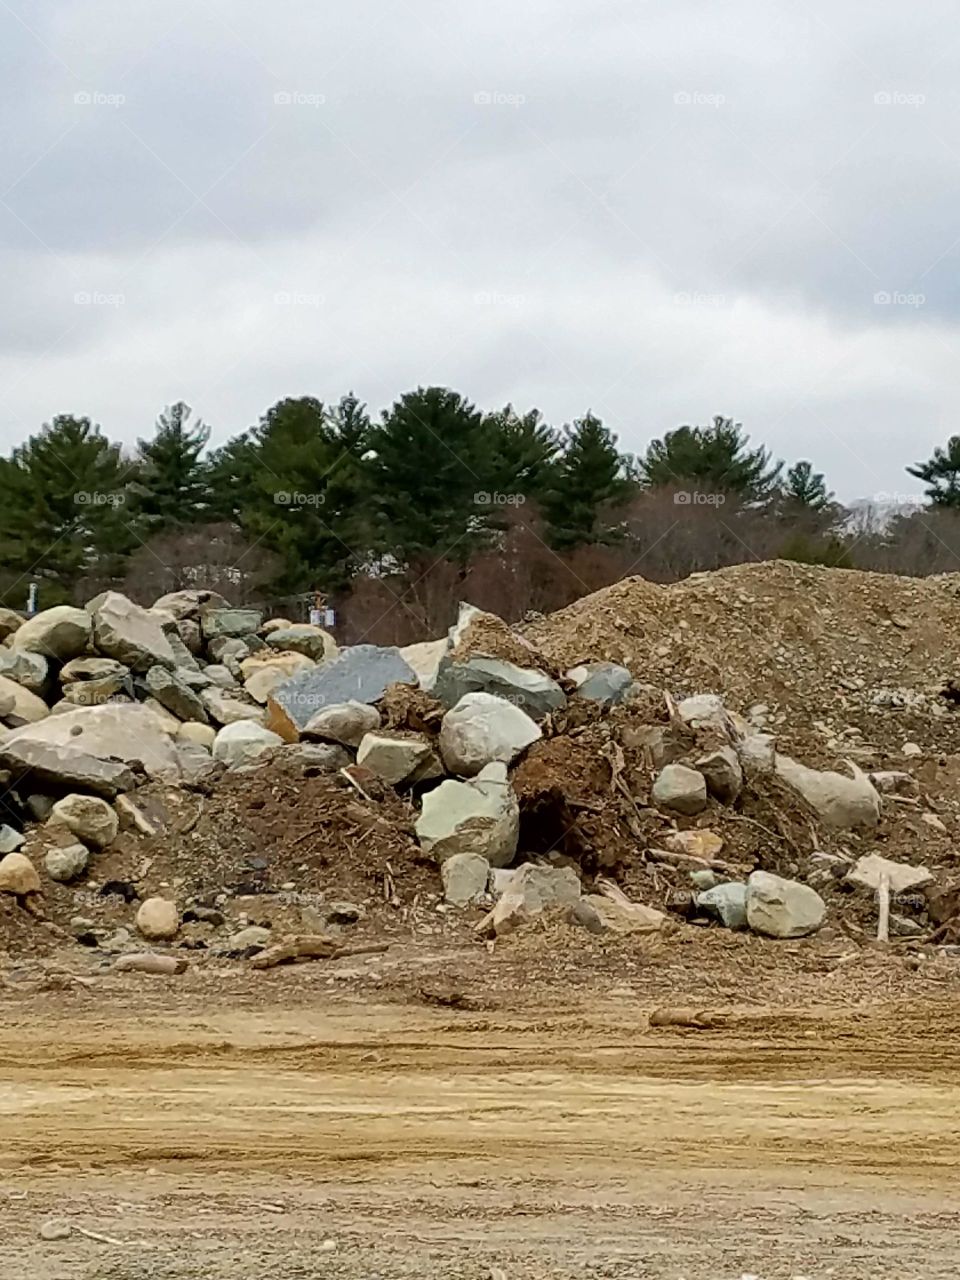 Photo of land being cleared of everything for development, you see a dirt pile & a huge pile of boulders, rocks and soil. There's nothing left, sad.